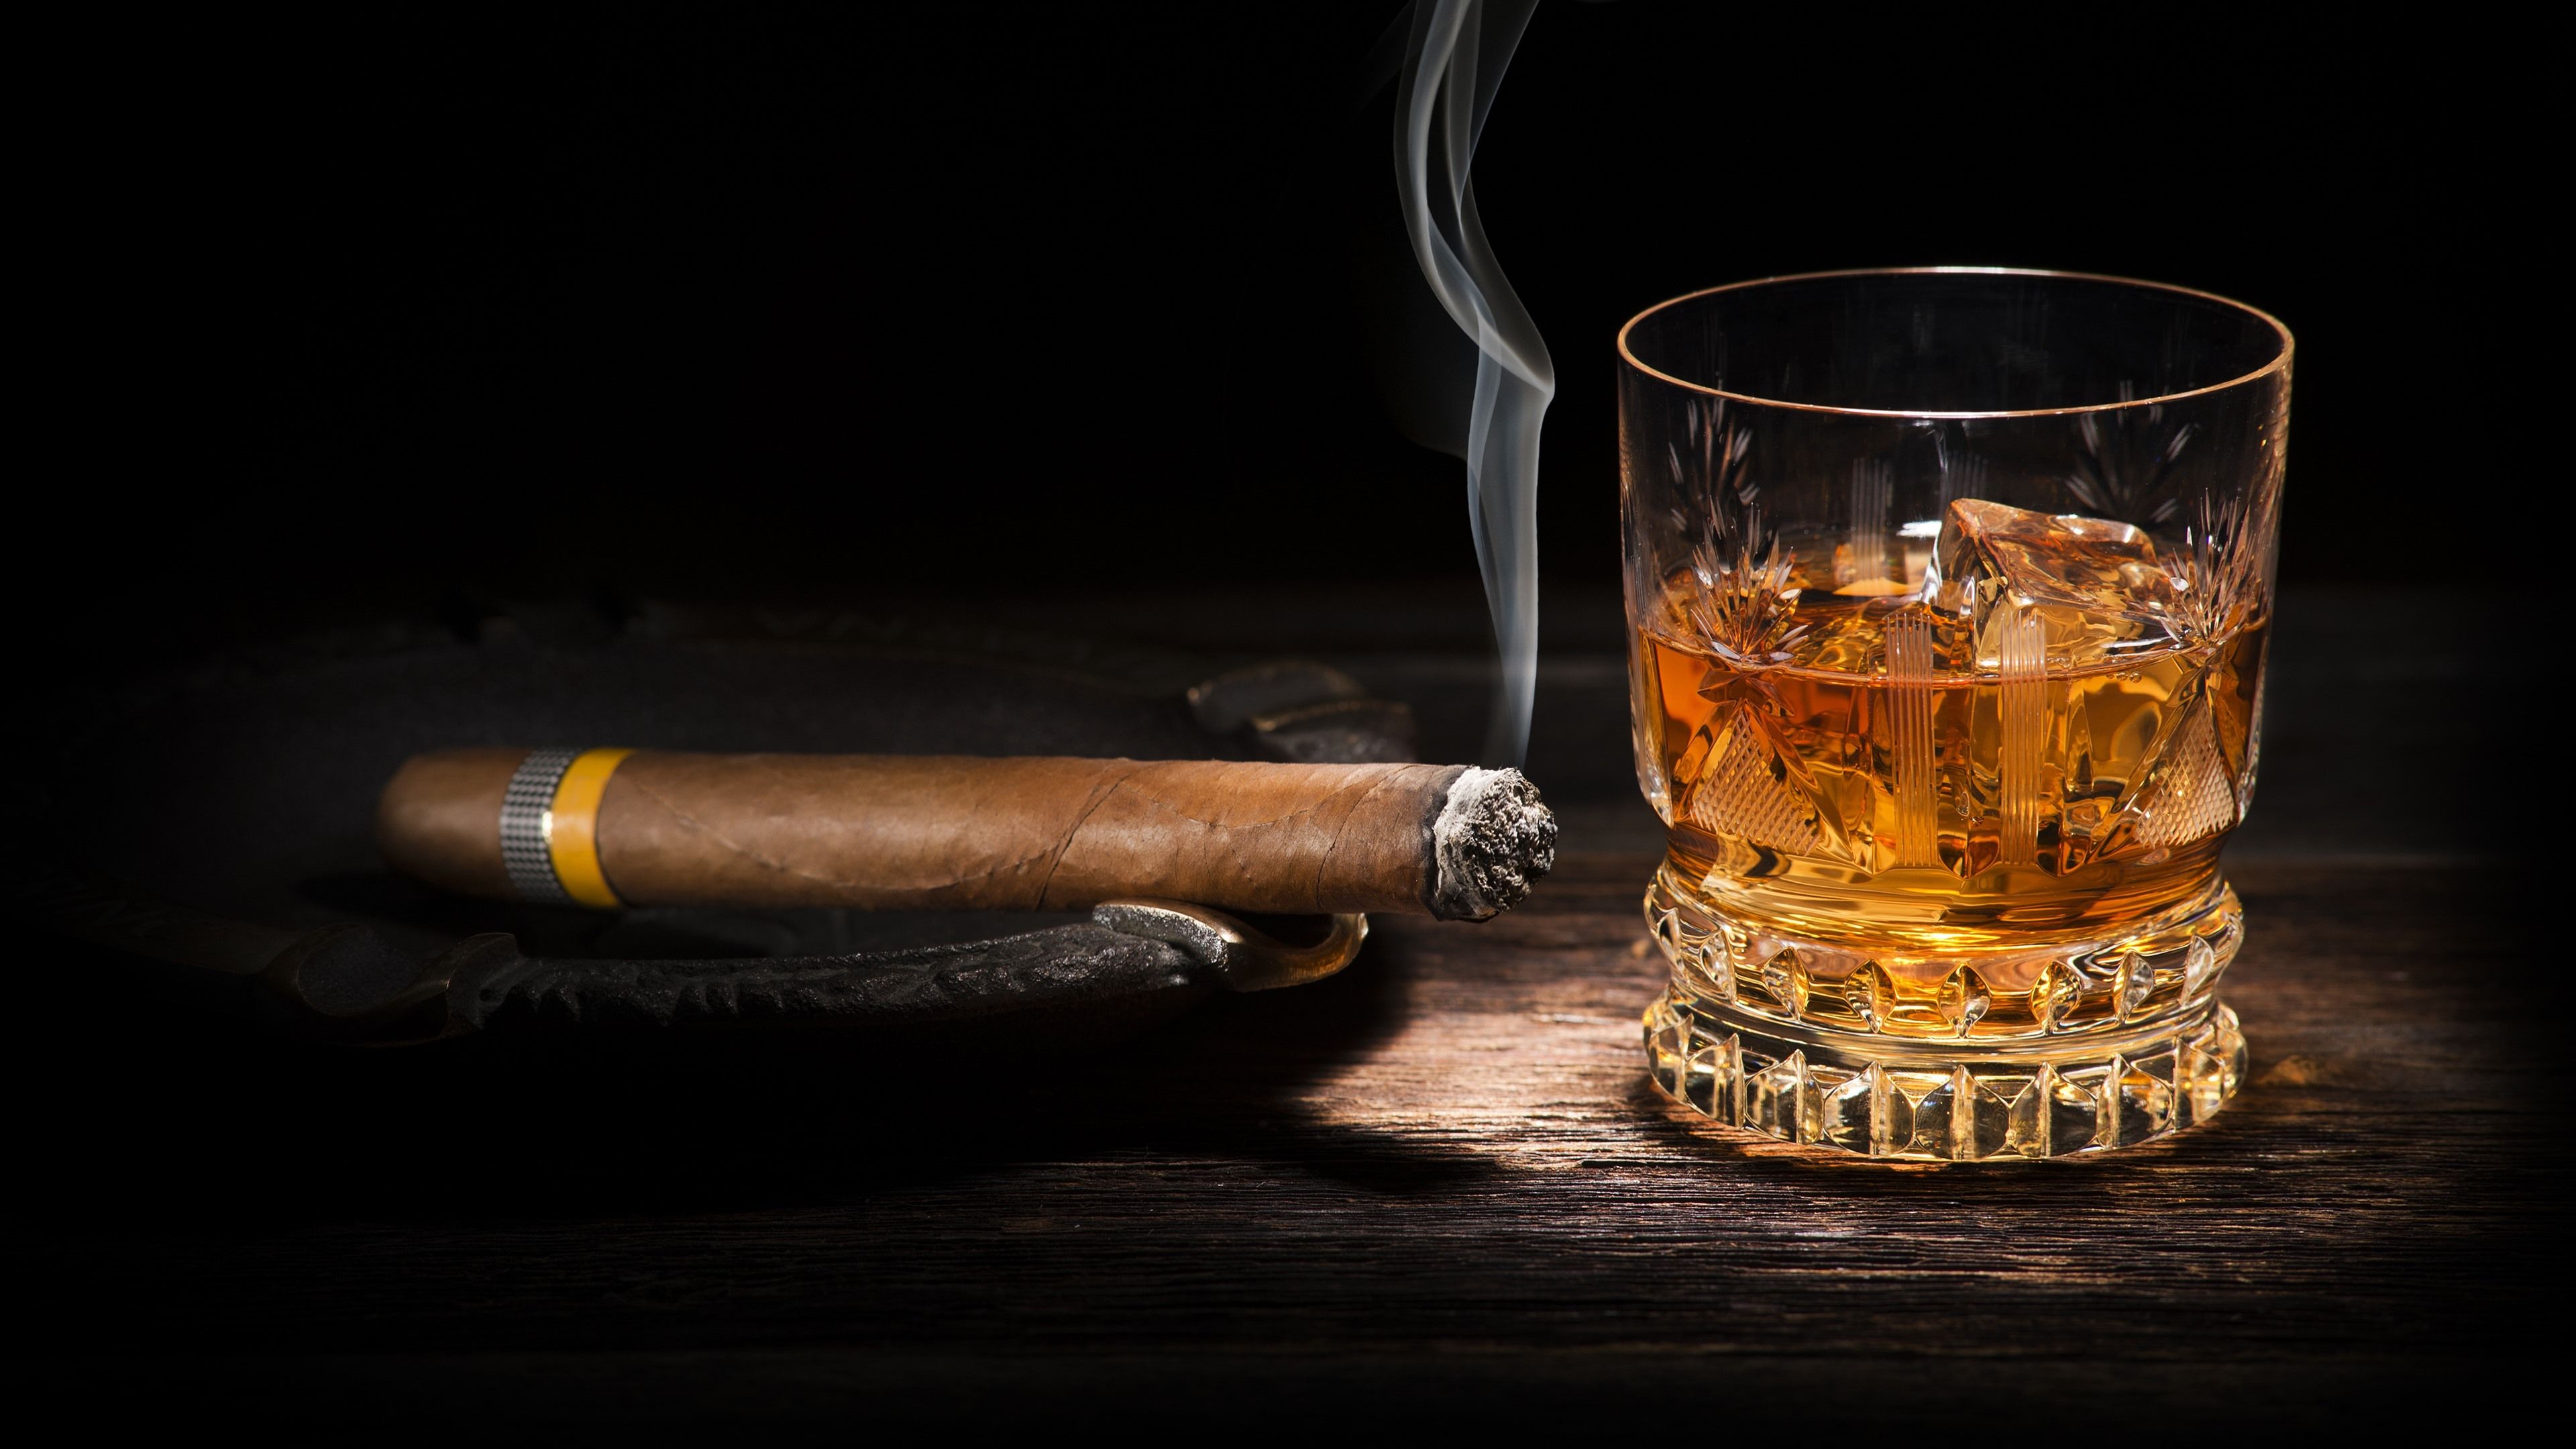 Wallpaper Cigar, whiskey 3840x2160 UHD 4K Picture, Image